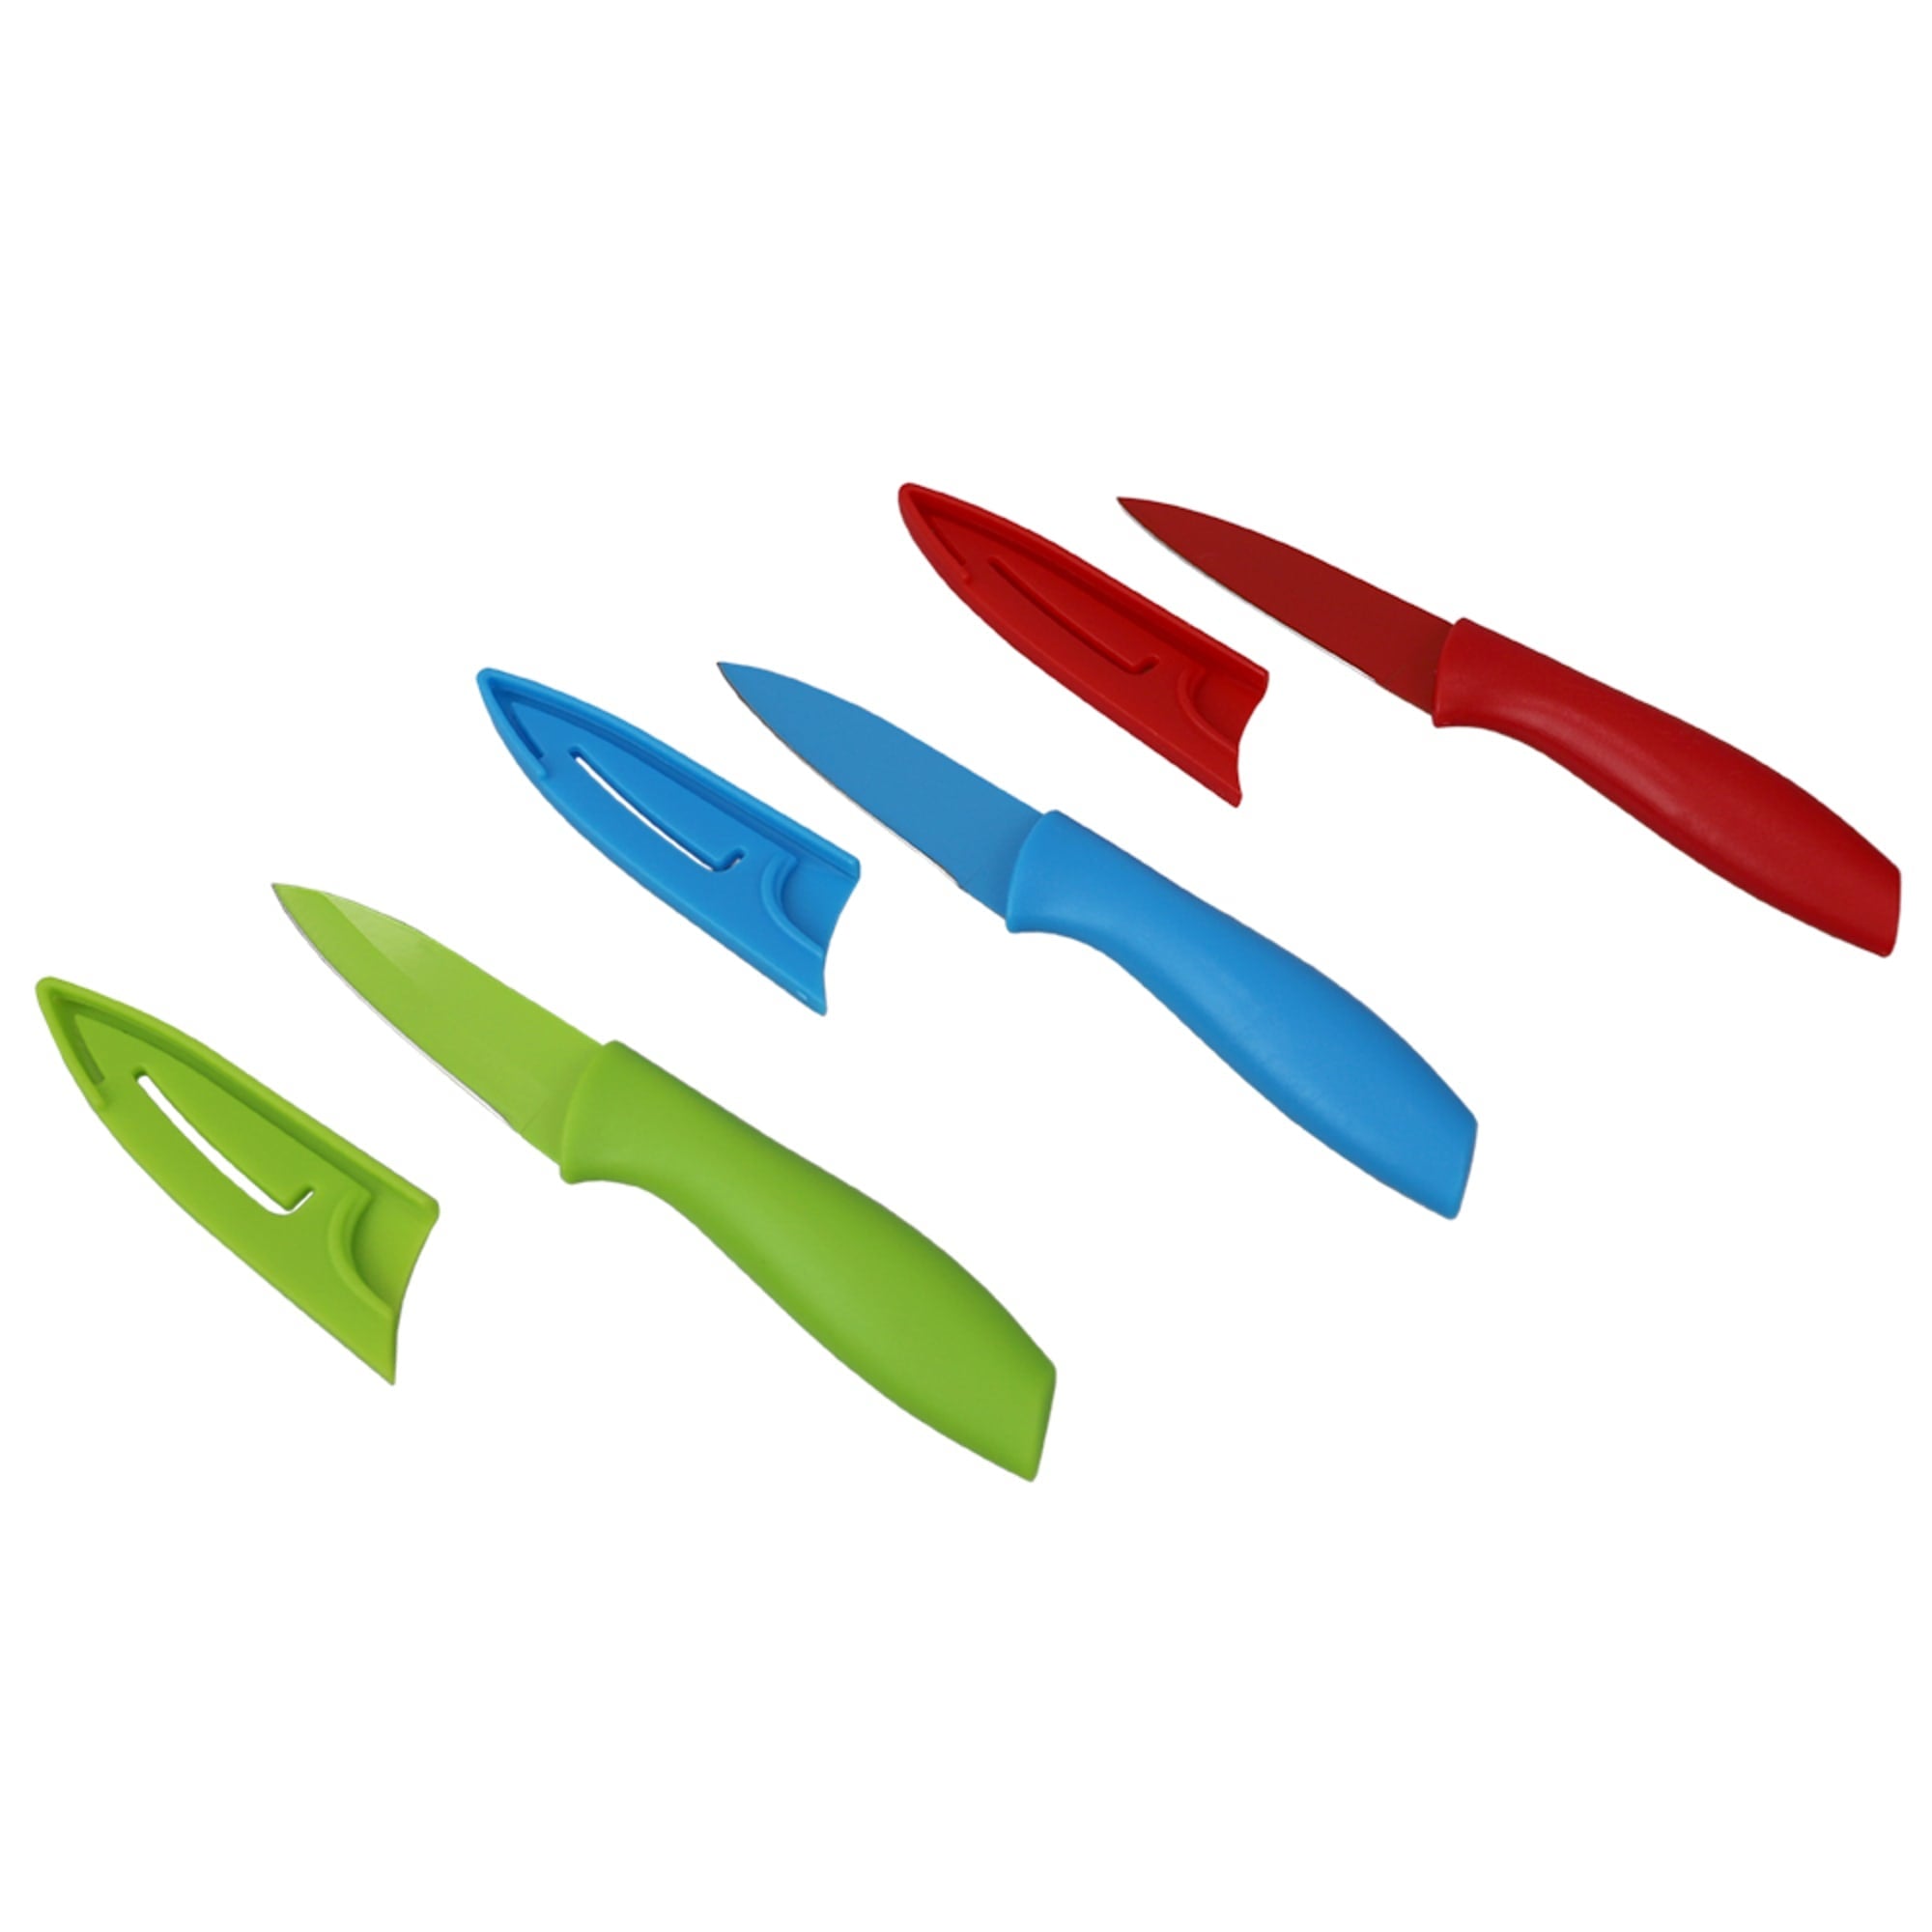 Home Basics 3.5" Stainless Steel Paring Knife with Soft Grip Plastic Handles and Matching Protective Knife Storage Covers, (Set of 3), Multi-Color $4.00 EACH, CASE PACK OF 12